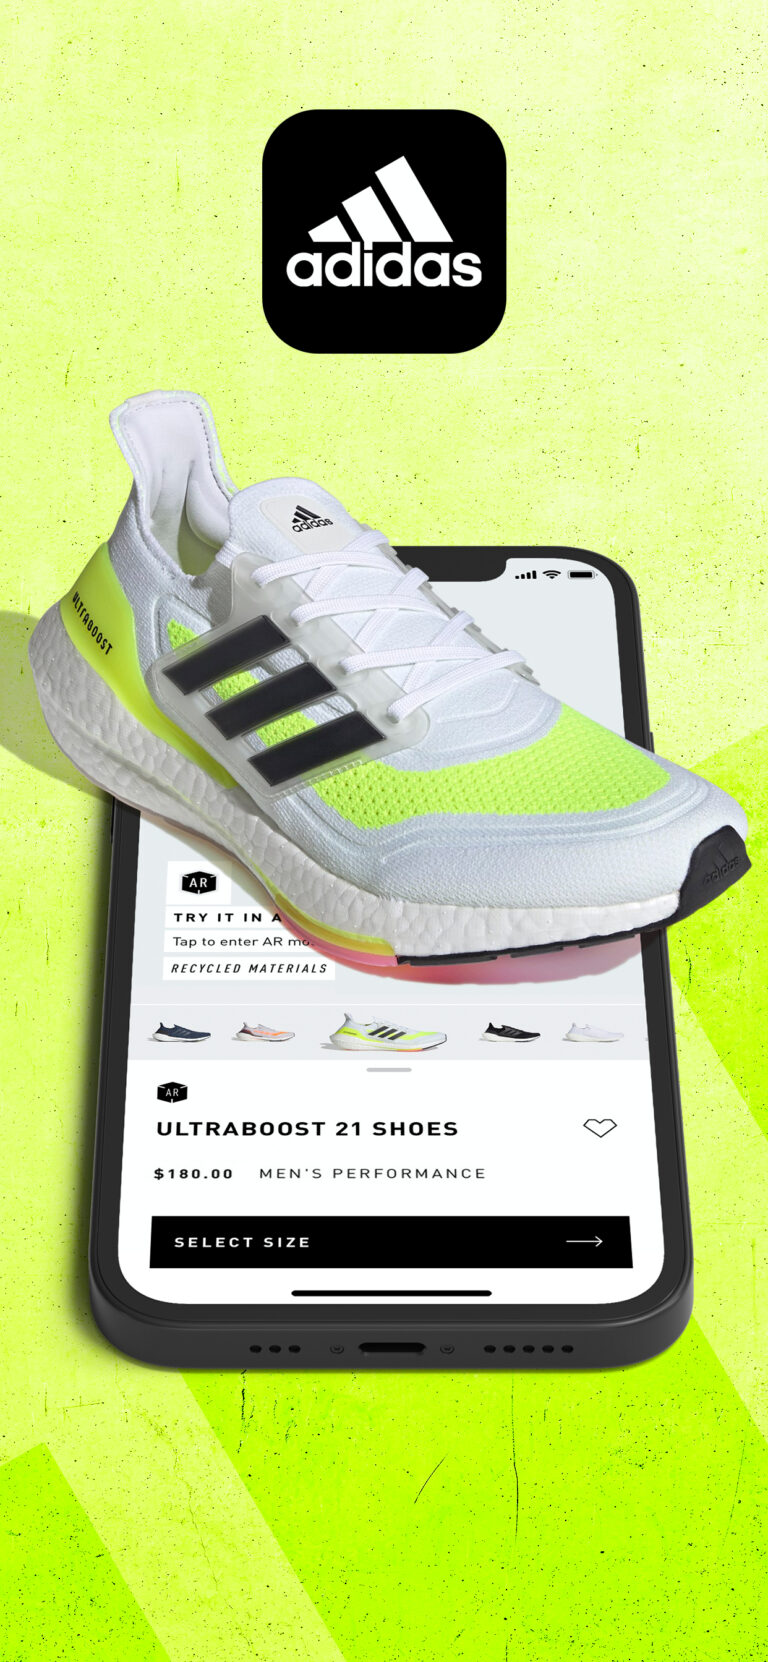 Adidas India launches its mobile app, for an elevated digital shopping experience